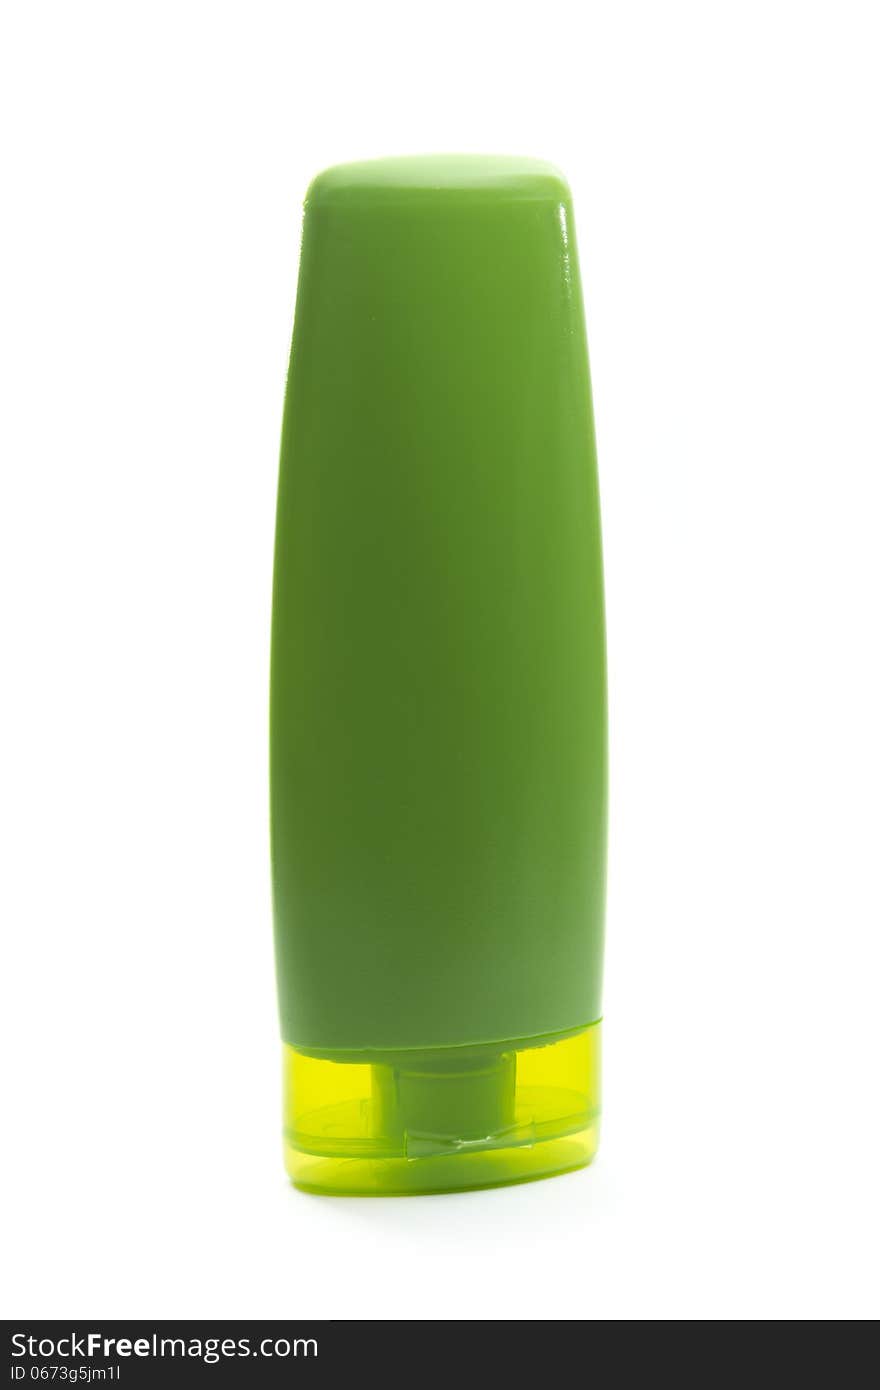 Green plastic cosmetic bottle isolated on white background. Green plastic cosmetic bottle isolated on white background